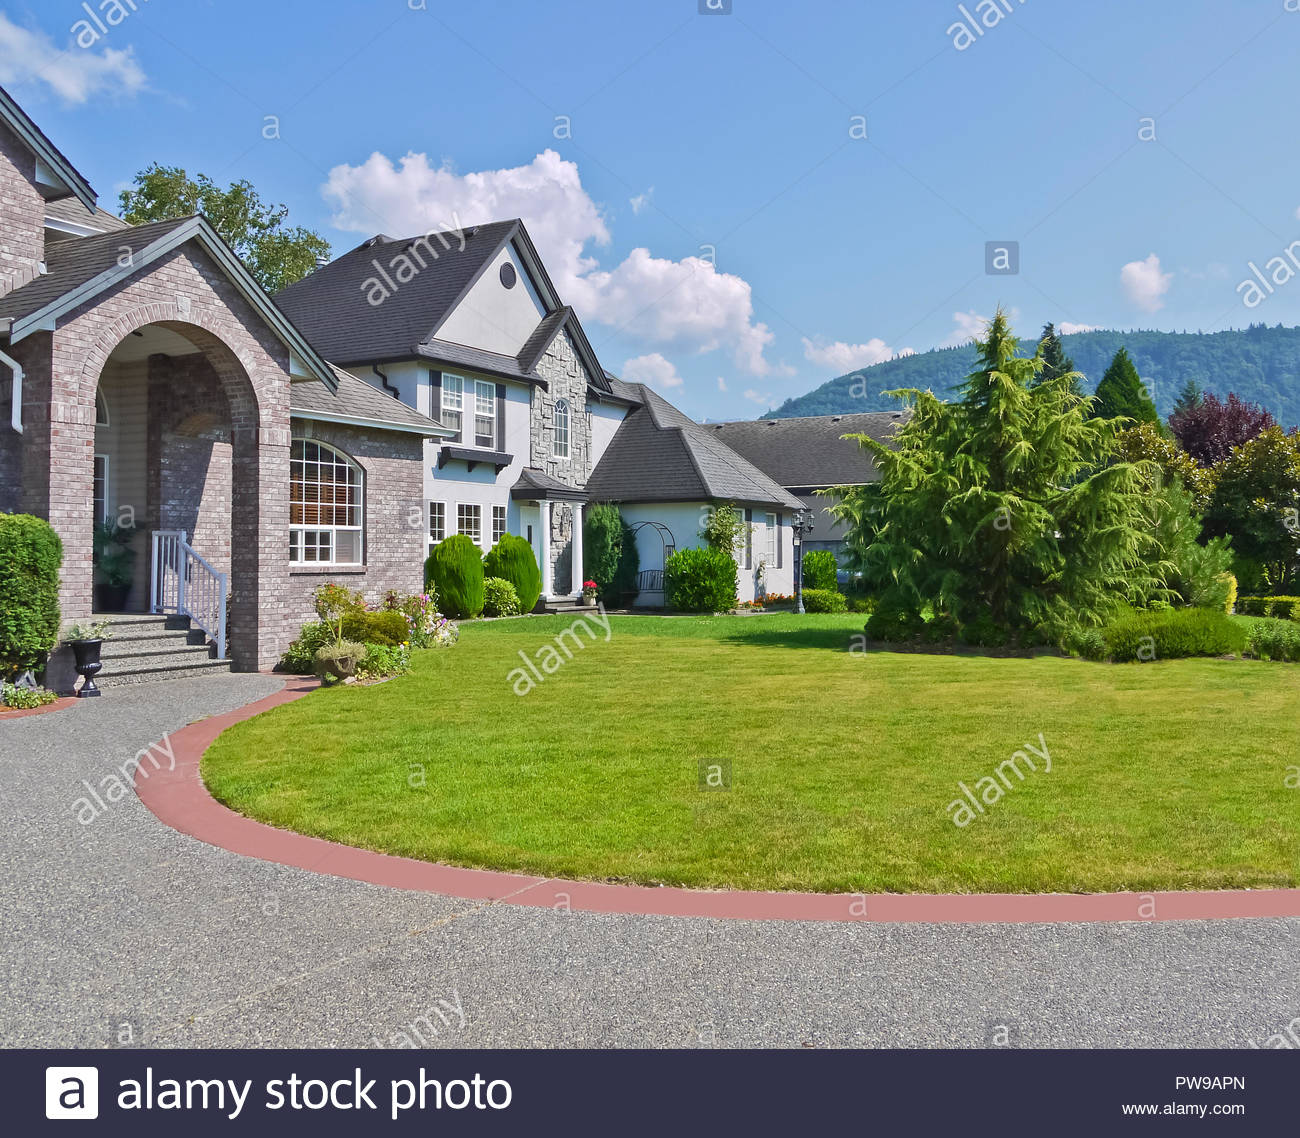 Rounded Driveway And Lawn In Front Of Residential Houses On Blue